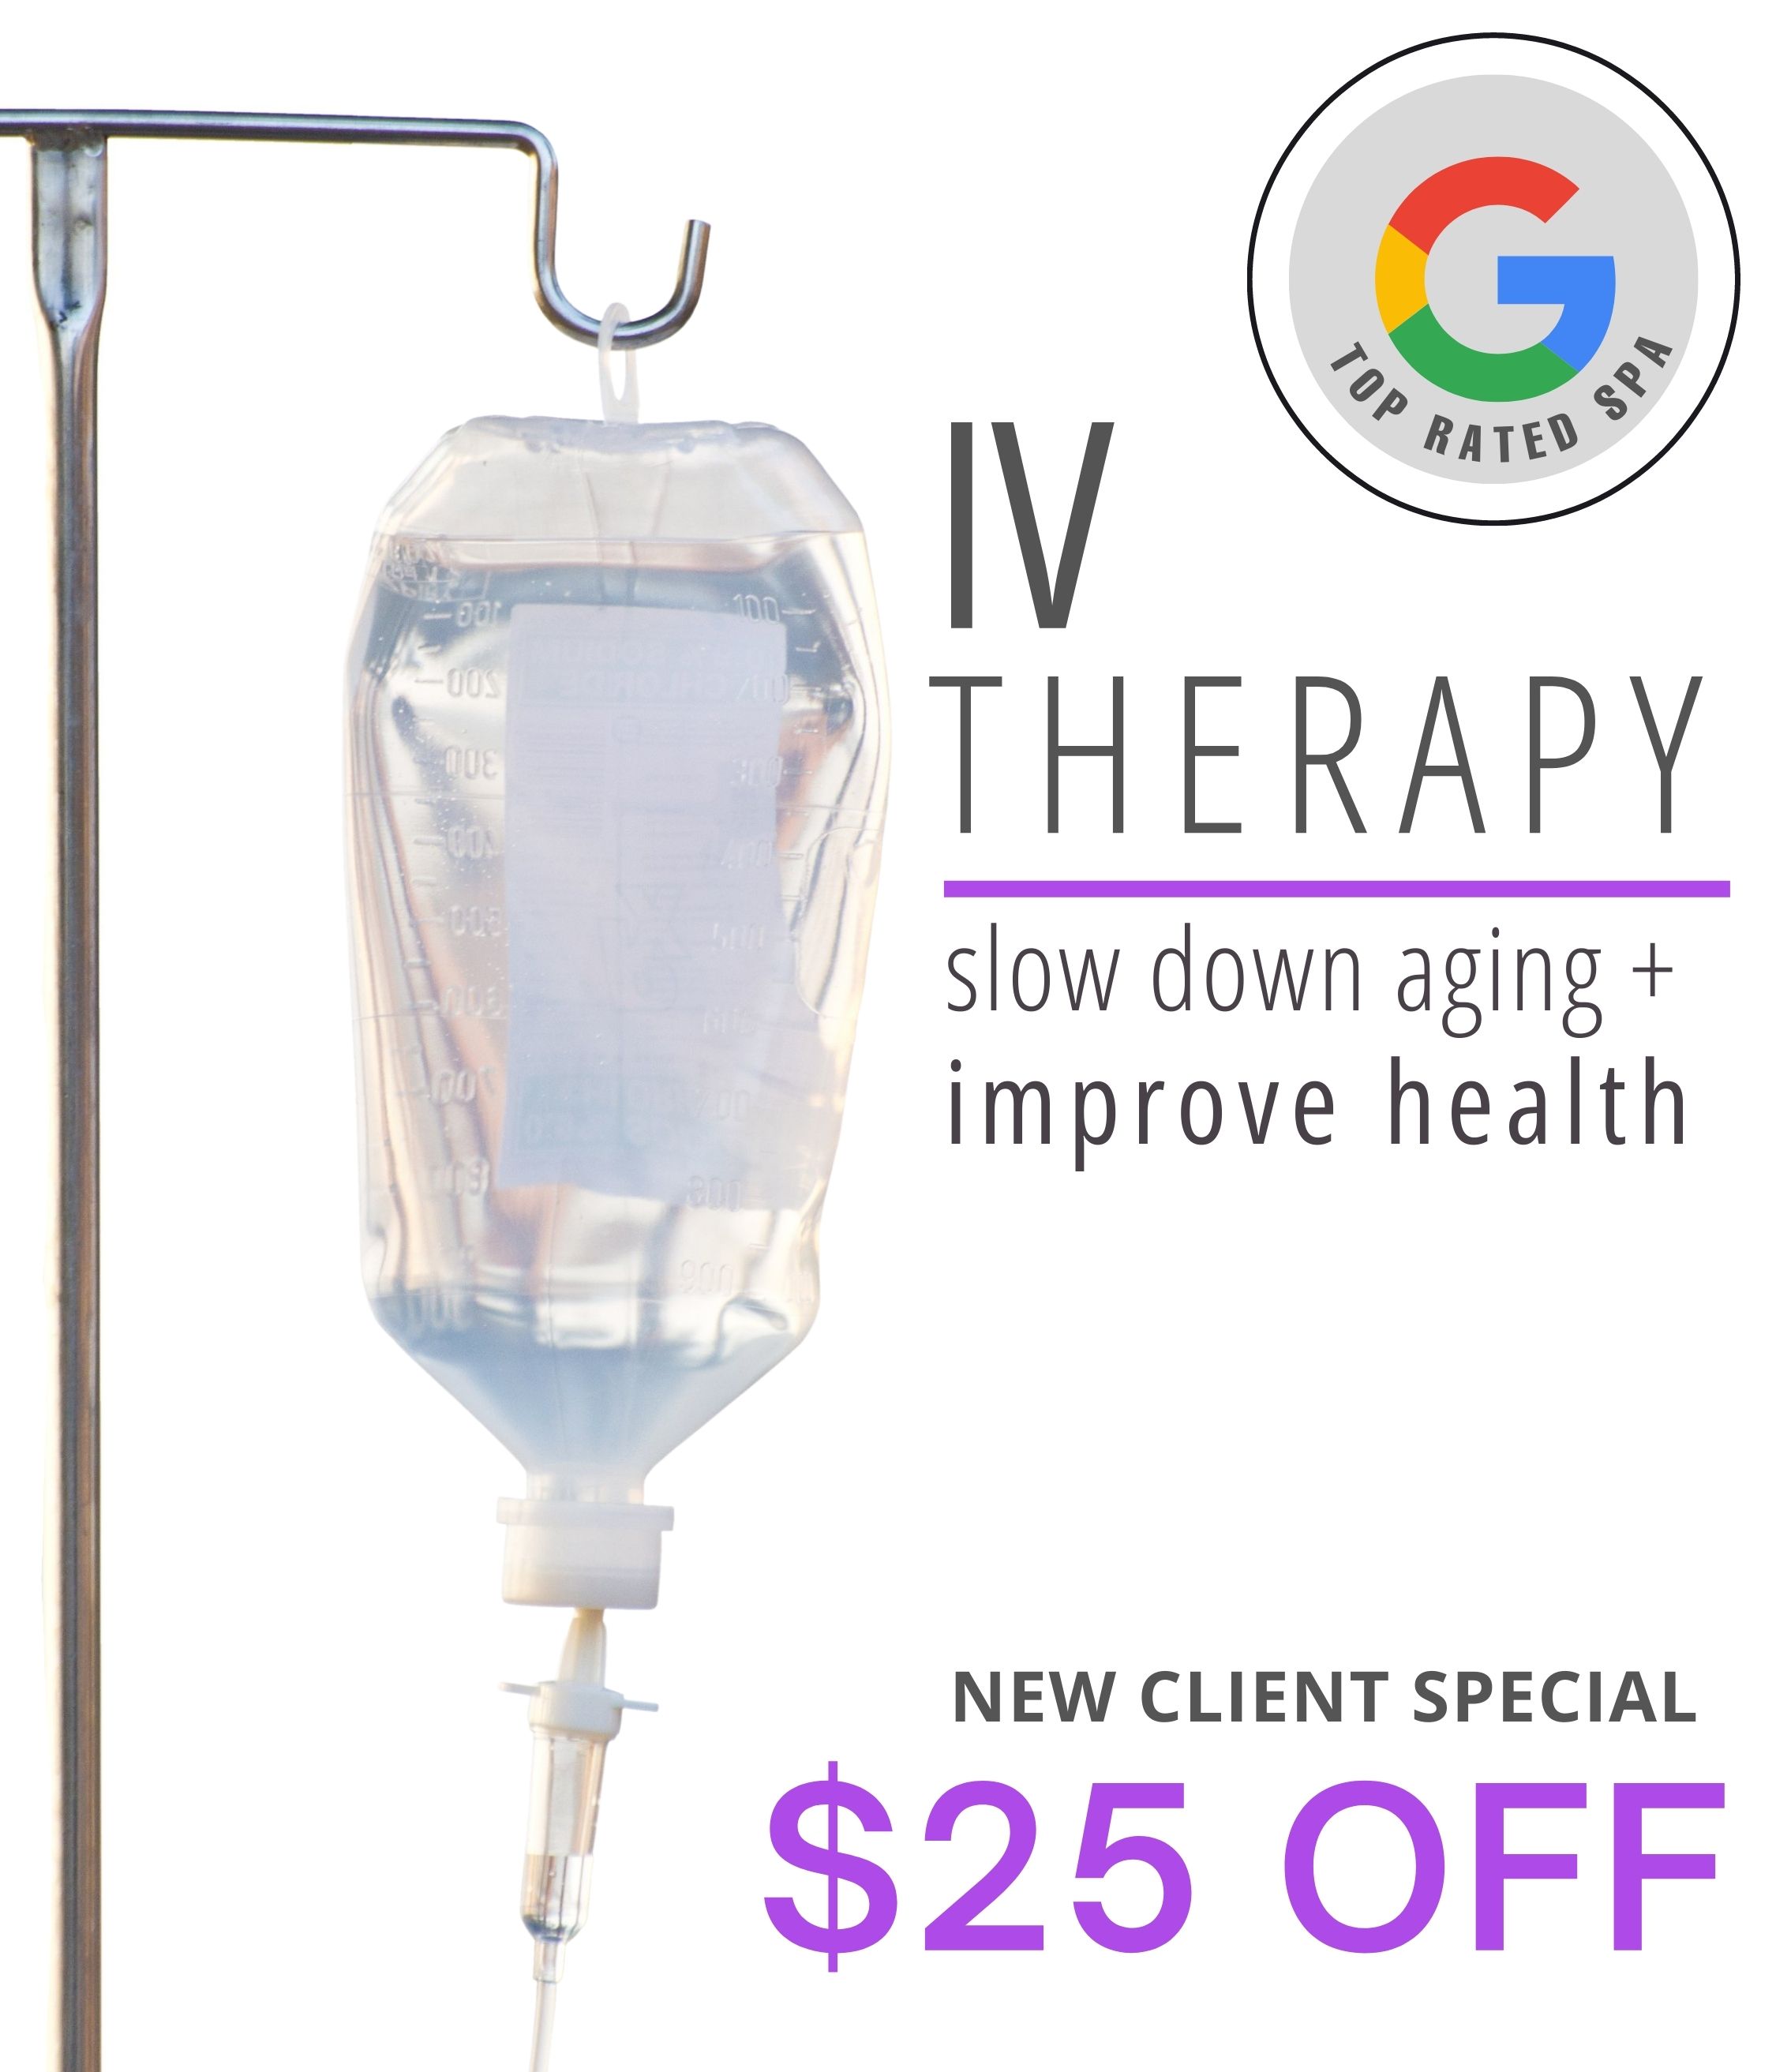 iv bag hanging from a stand with a 25 dollar off offer